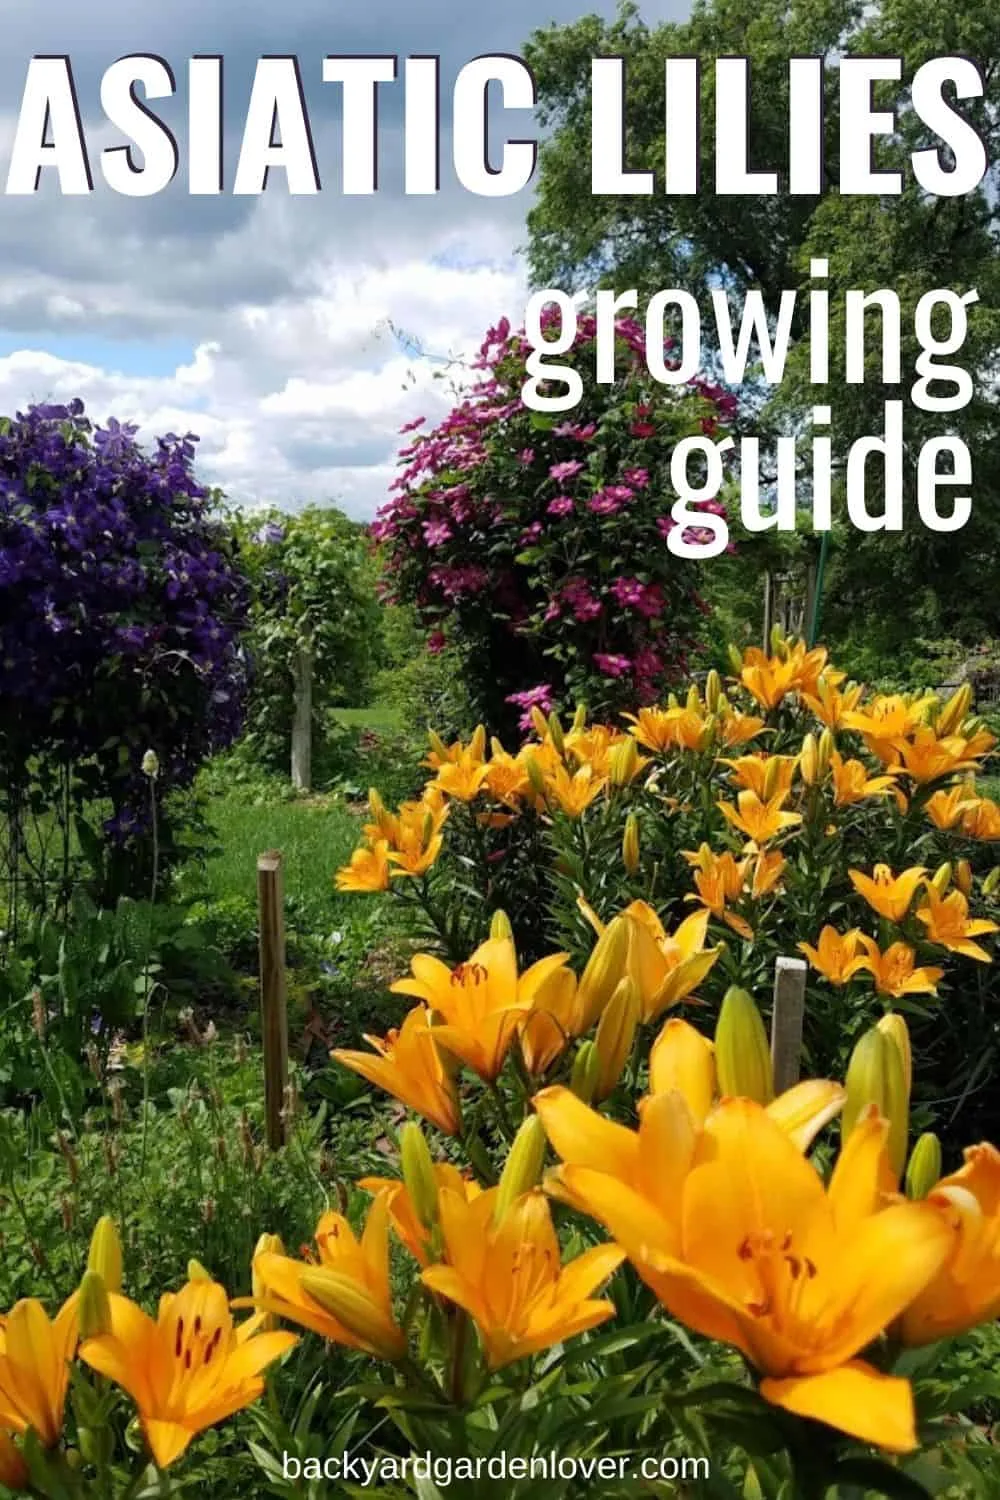 Asiatic lilies growing guide